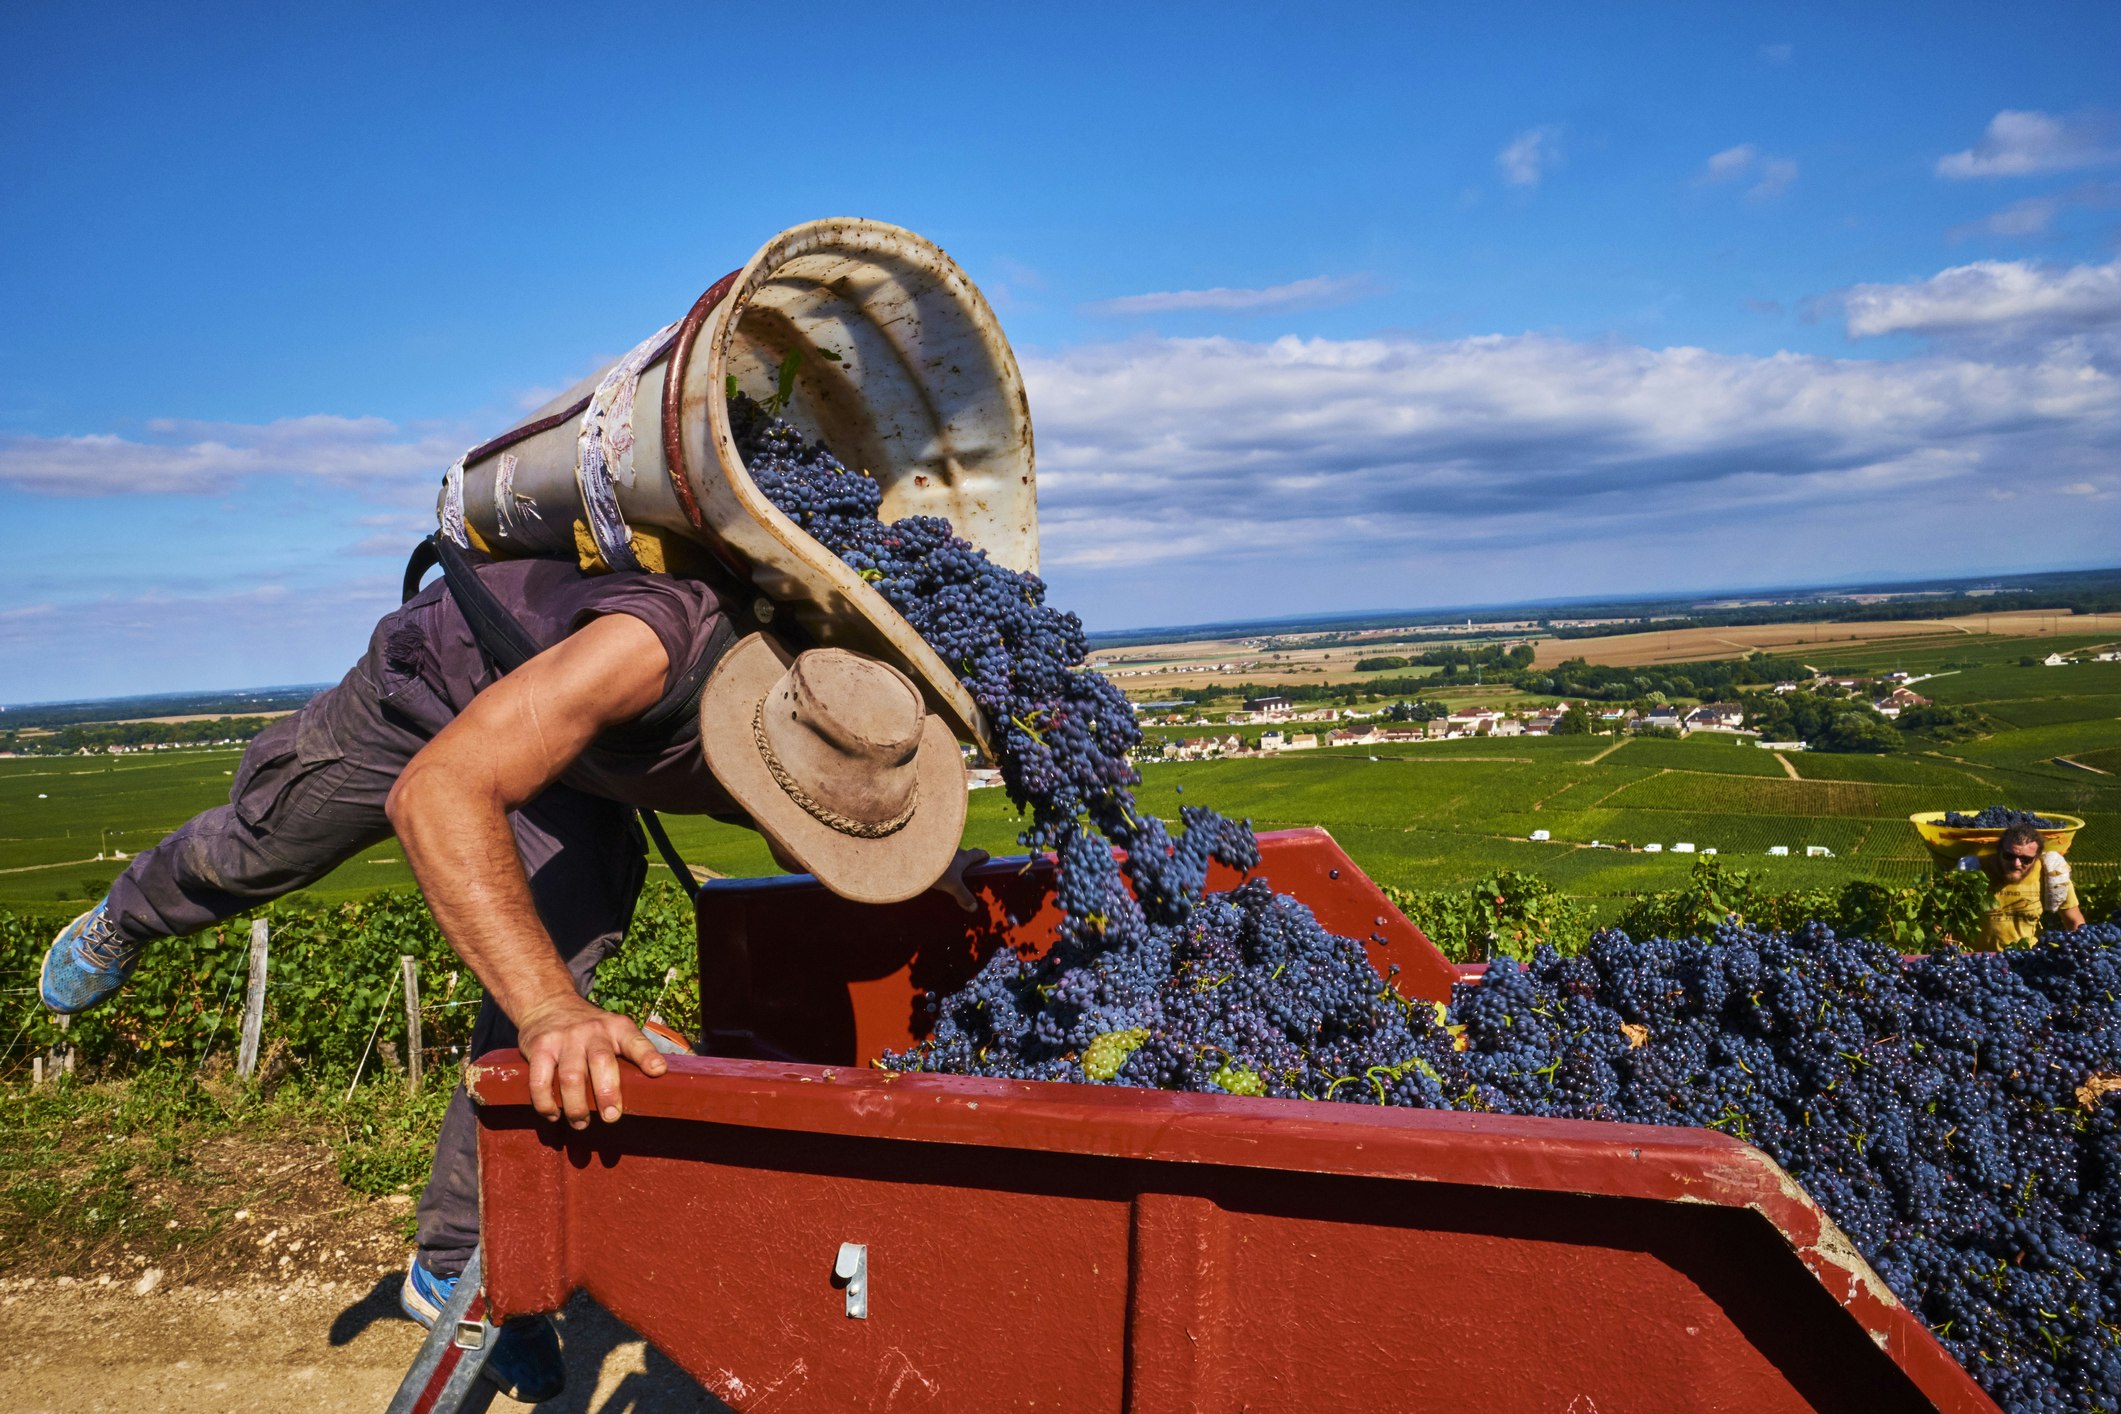 Grape-harvester pouring grapes into a red truck